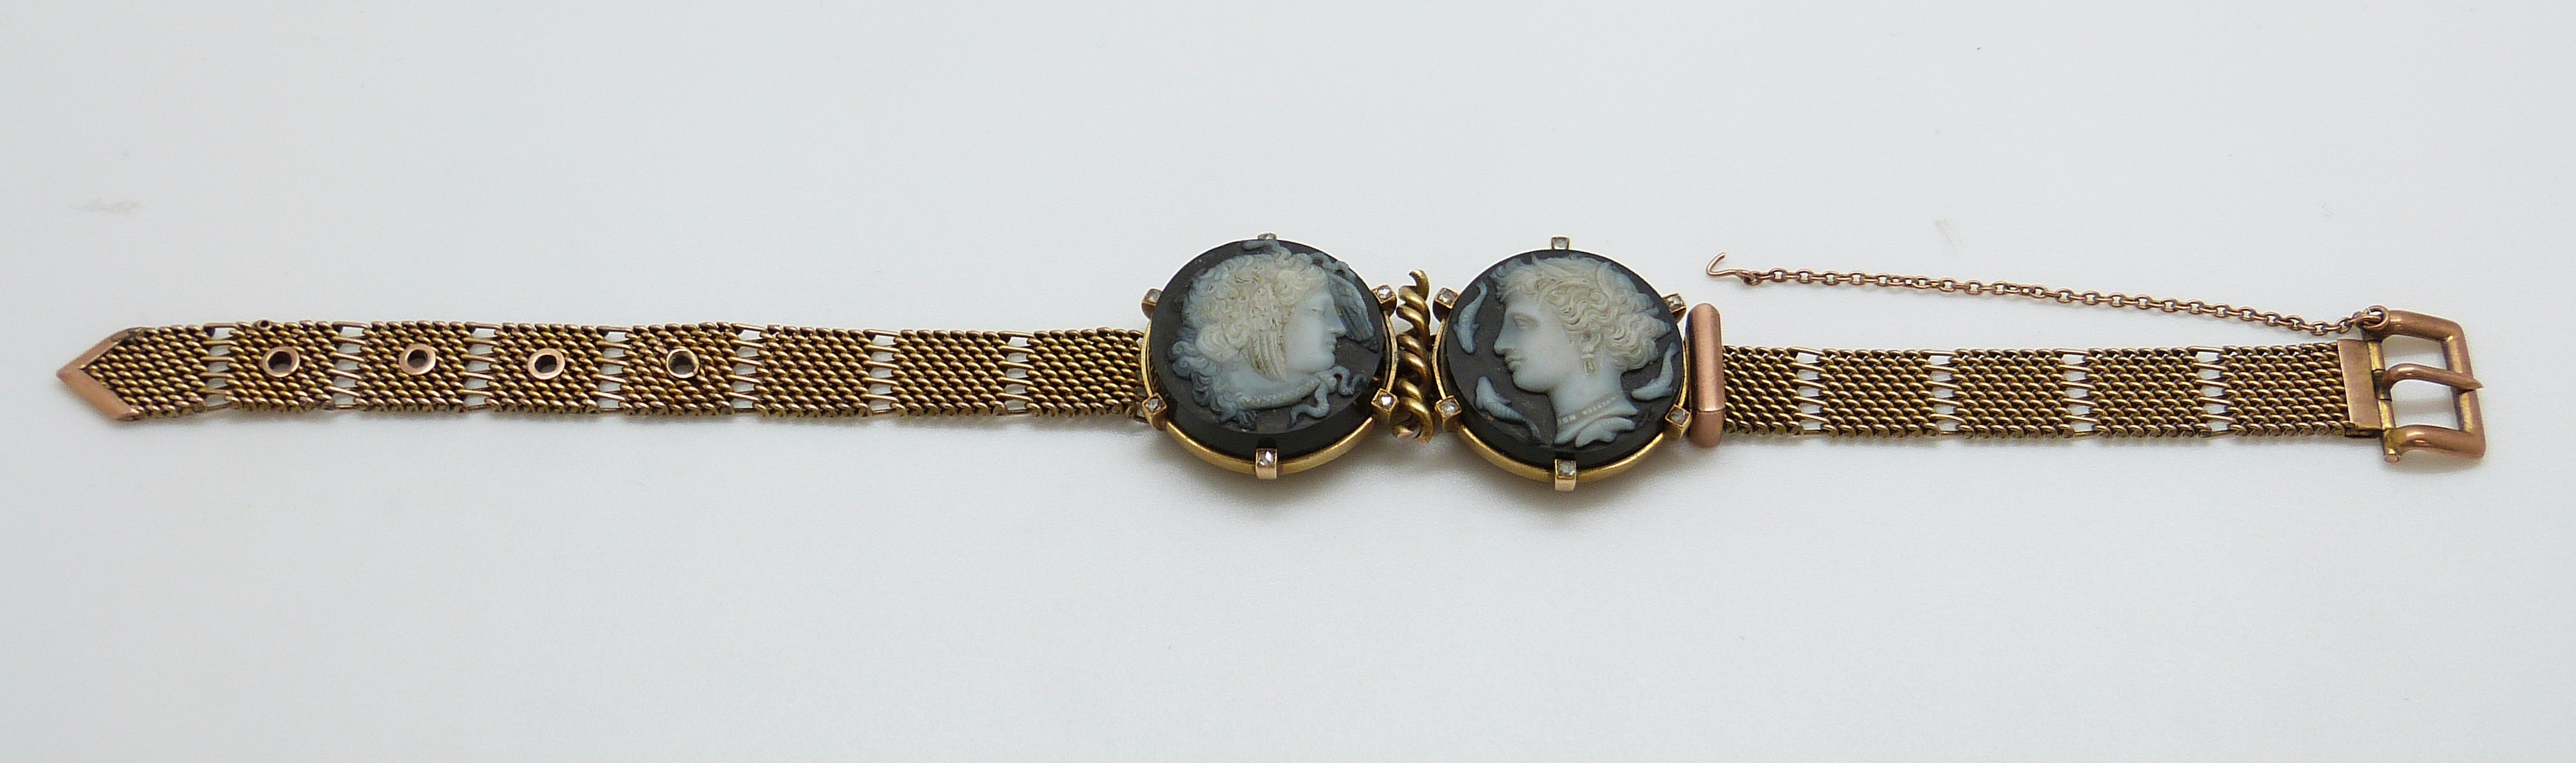 A 9ct gold Victorian bracelet set with two finely carved hardstone cameos depicting day and night,